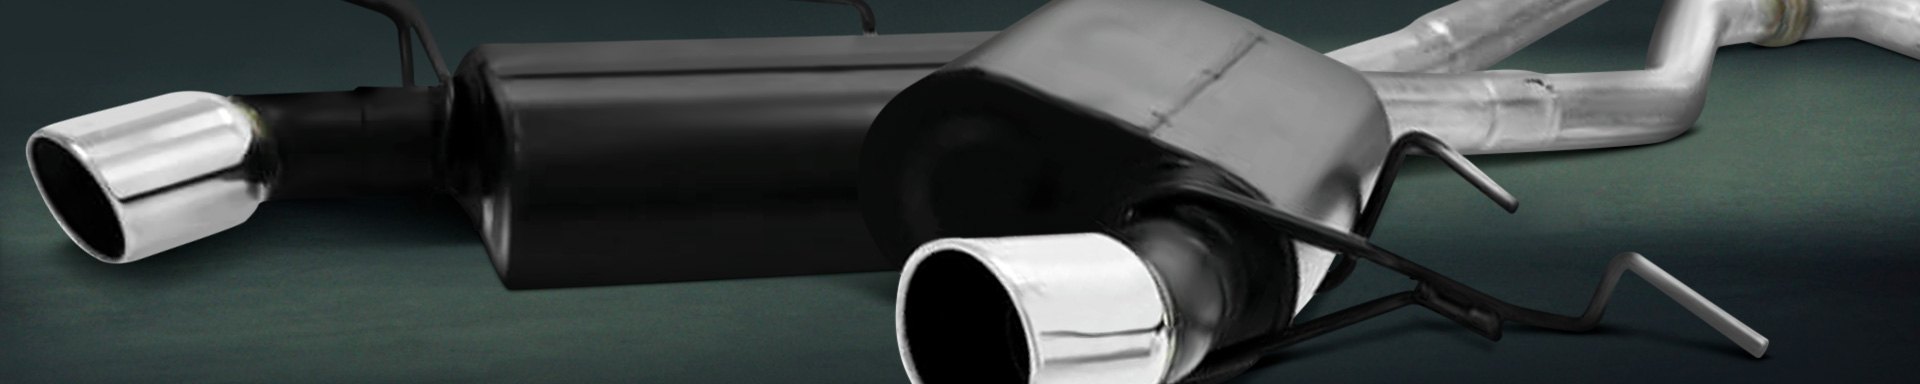 Get Performance Improvement With Flowmaster New Exhaust For 2011-2013 Grand Cherokee